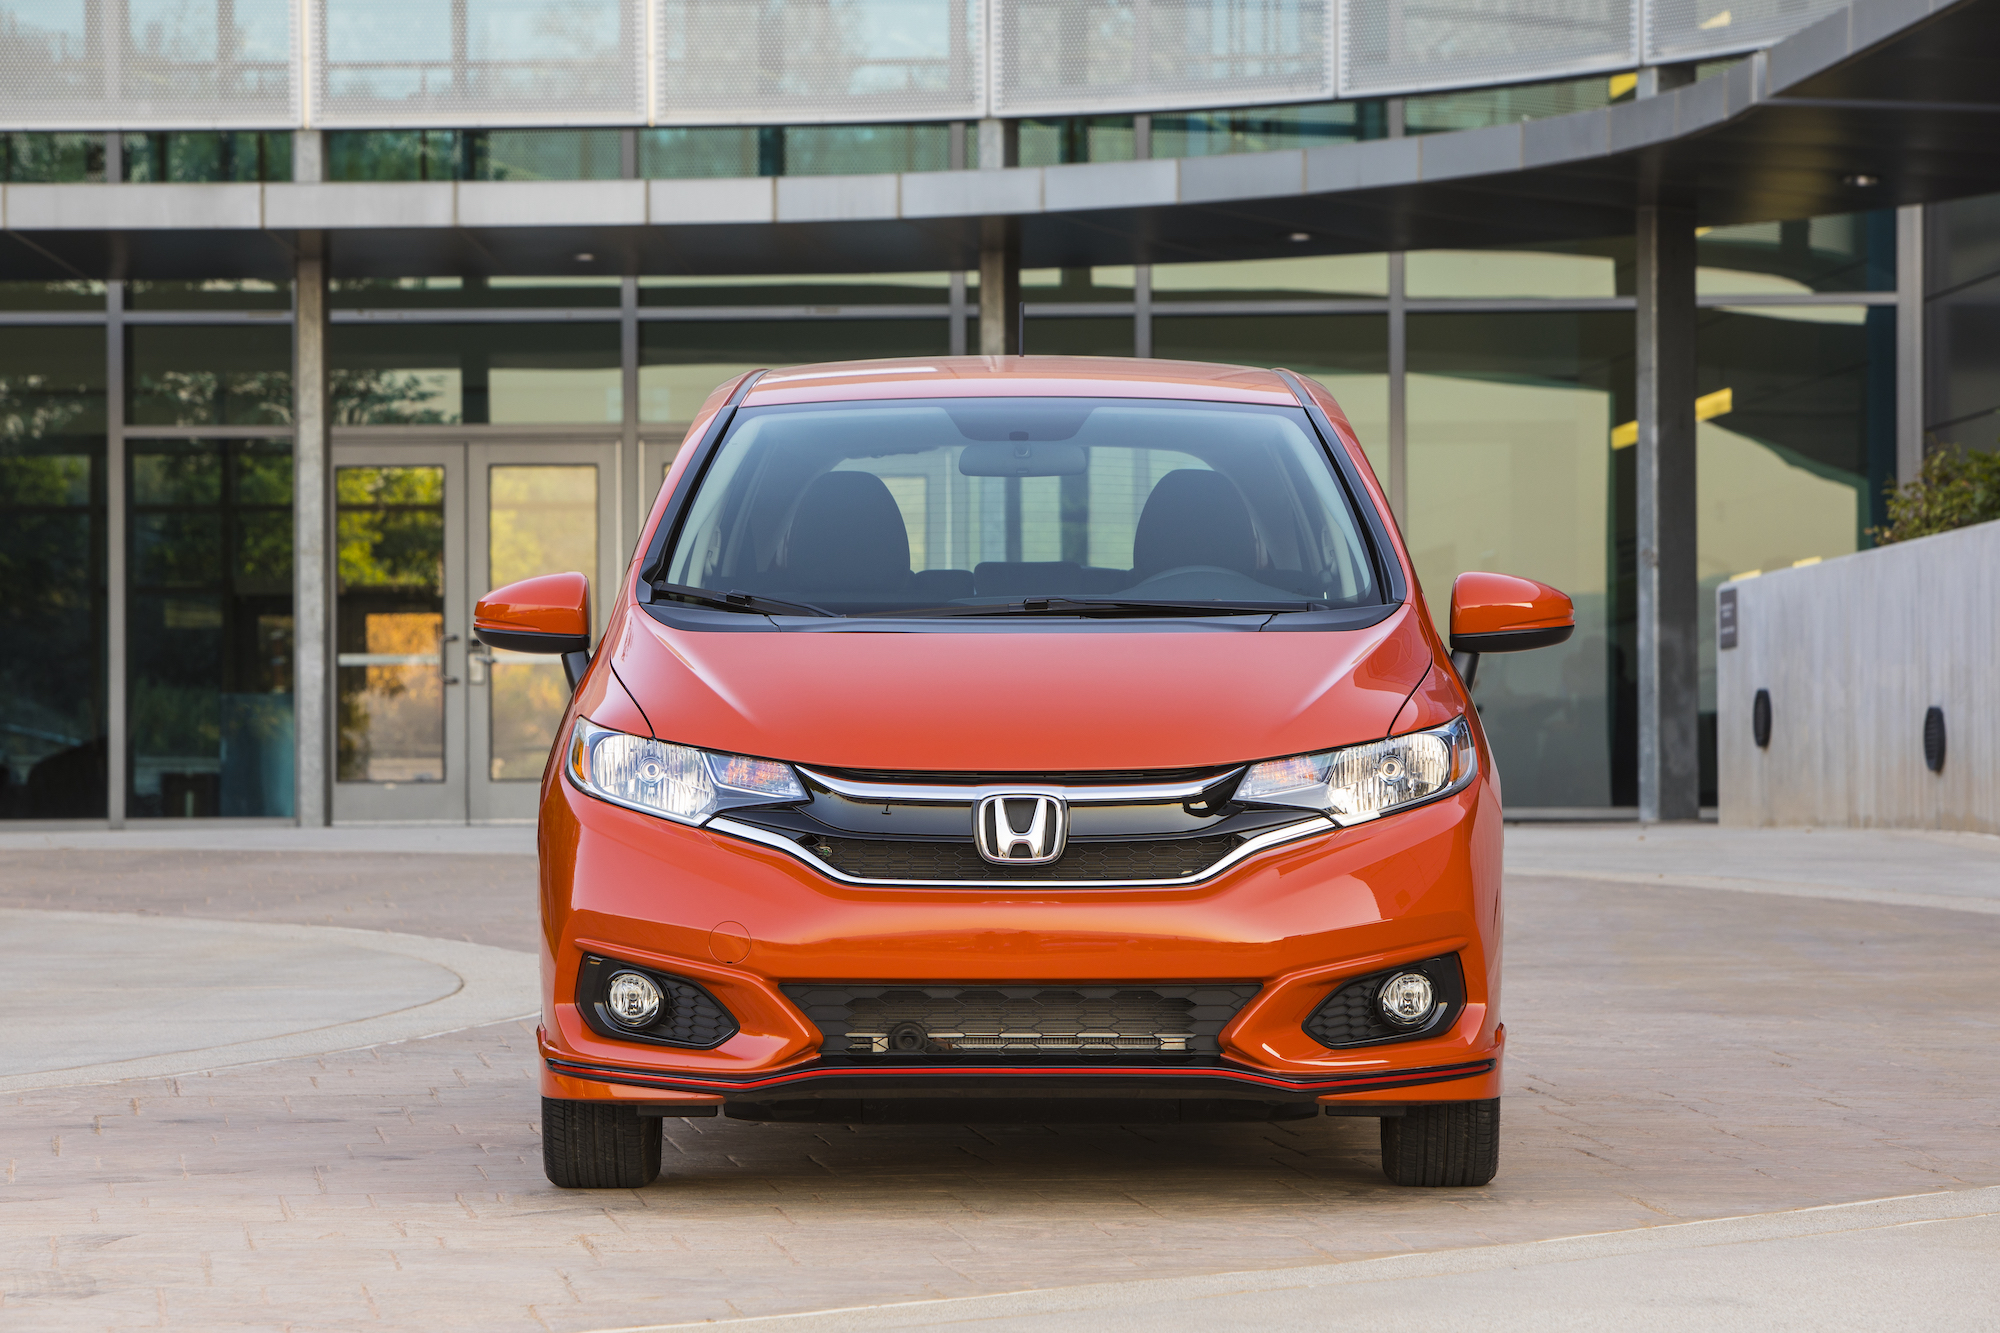 Head-on view of an orange 2020 Honda Fit parked in front of a glass building